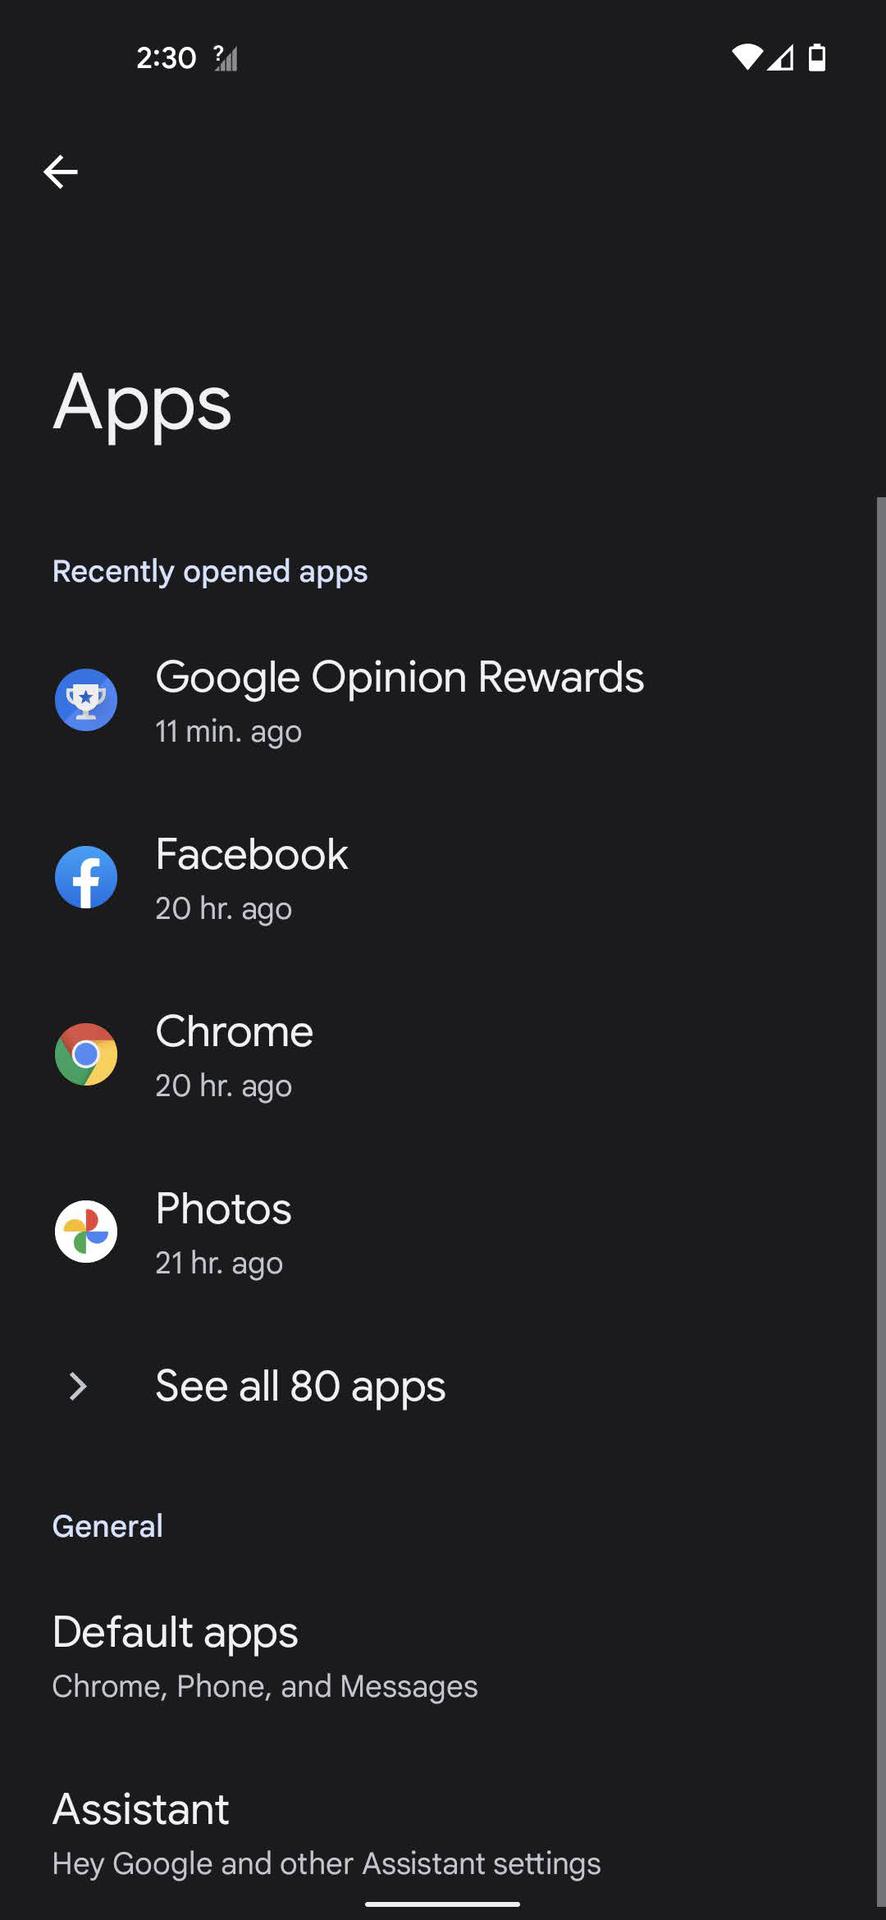 How to enable a disabled app 2